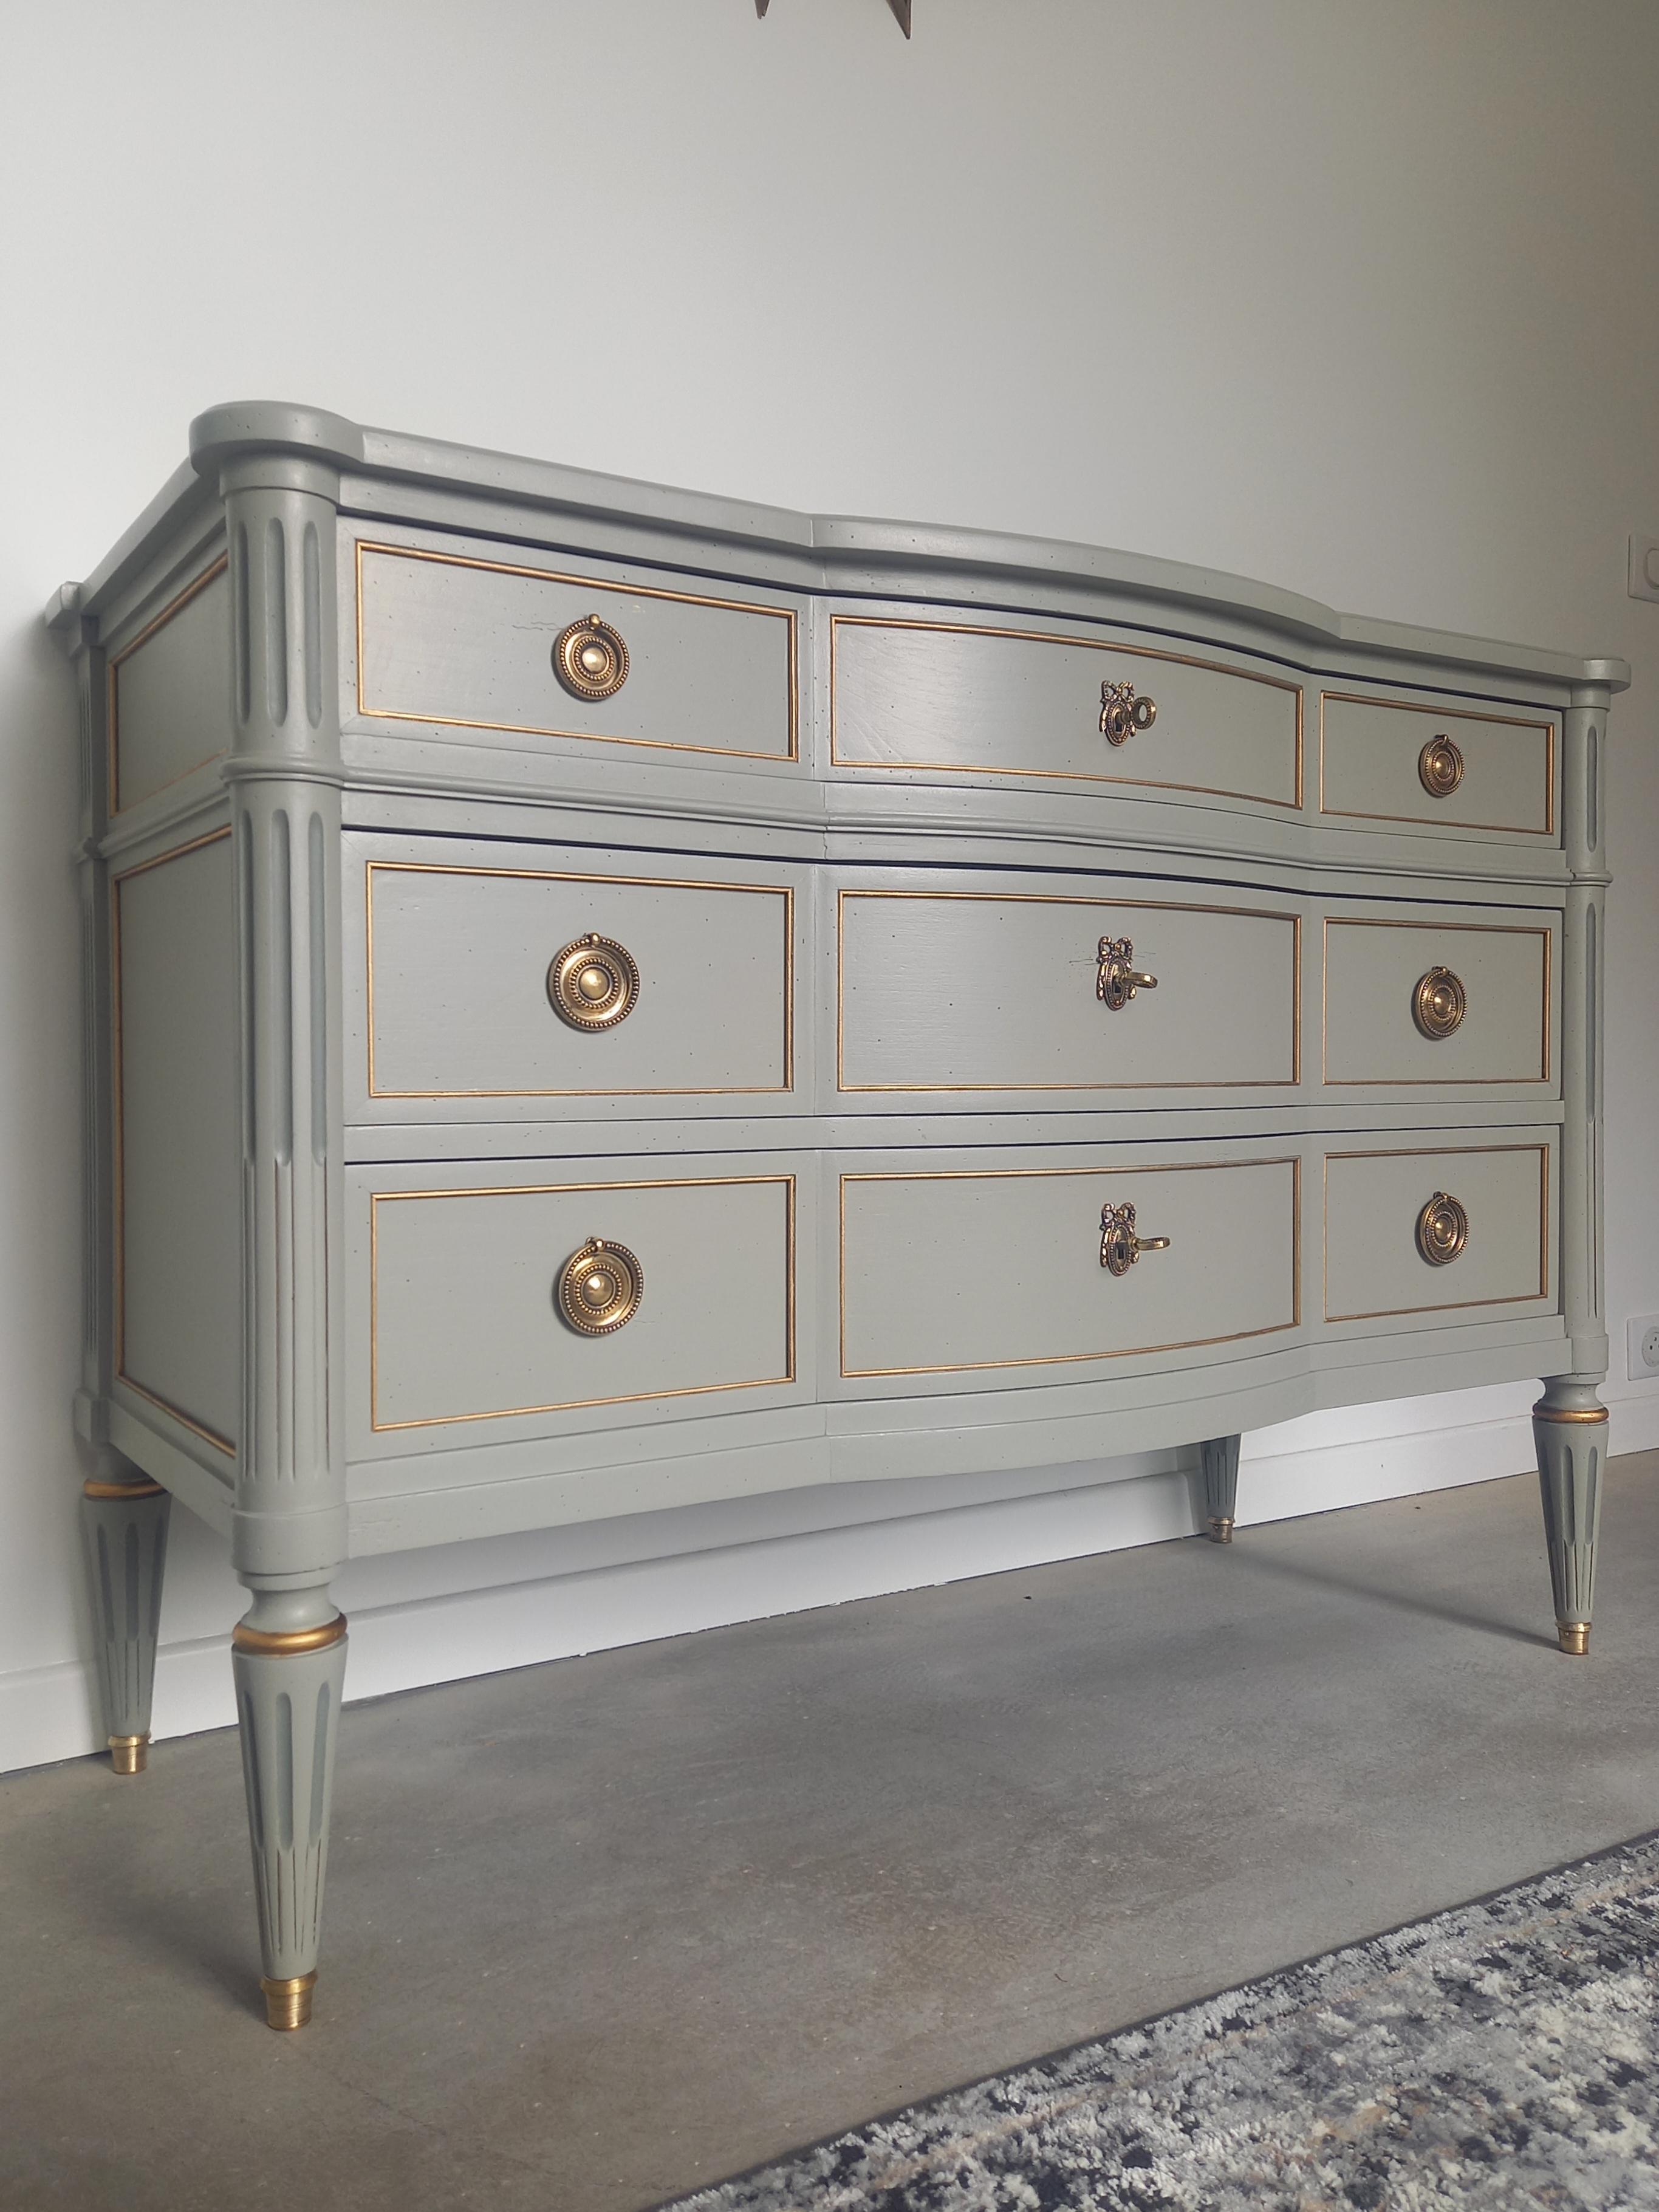 Antique French, Louis XVI style chest of drawers, fluted legs finished with golden bronze clogs. Three dovetailed drawers domed in the center, all the locks are functional and the keys are complete.
Impeccable structure, the small defects of the